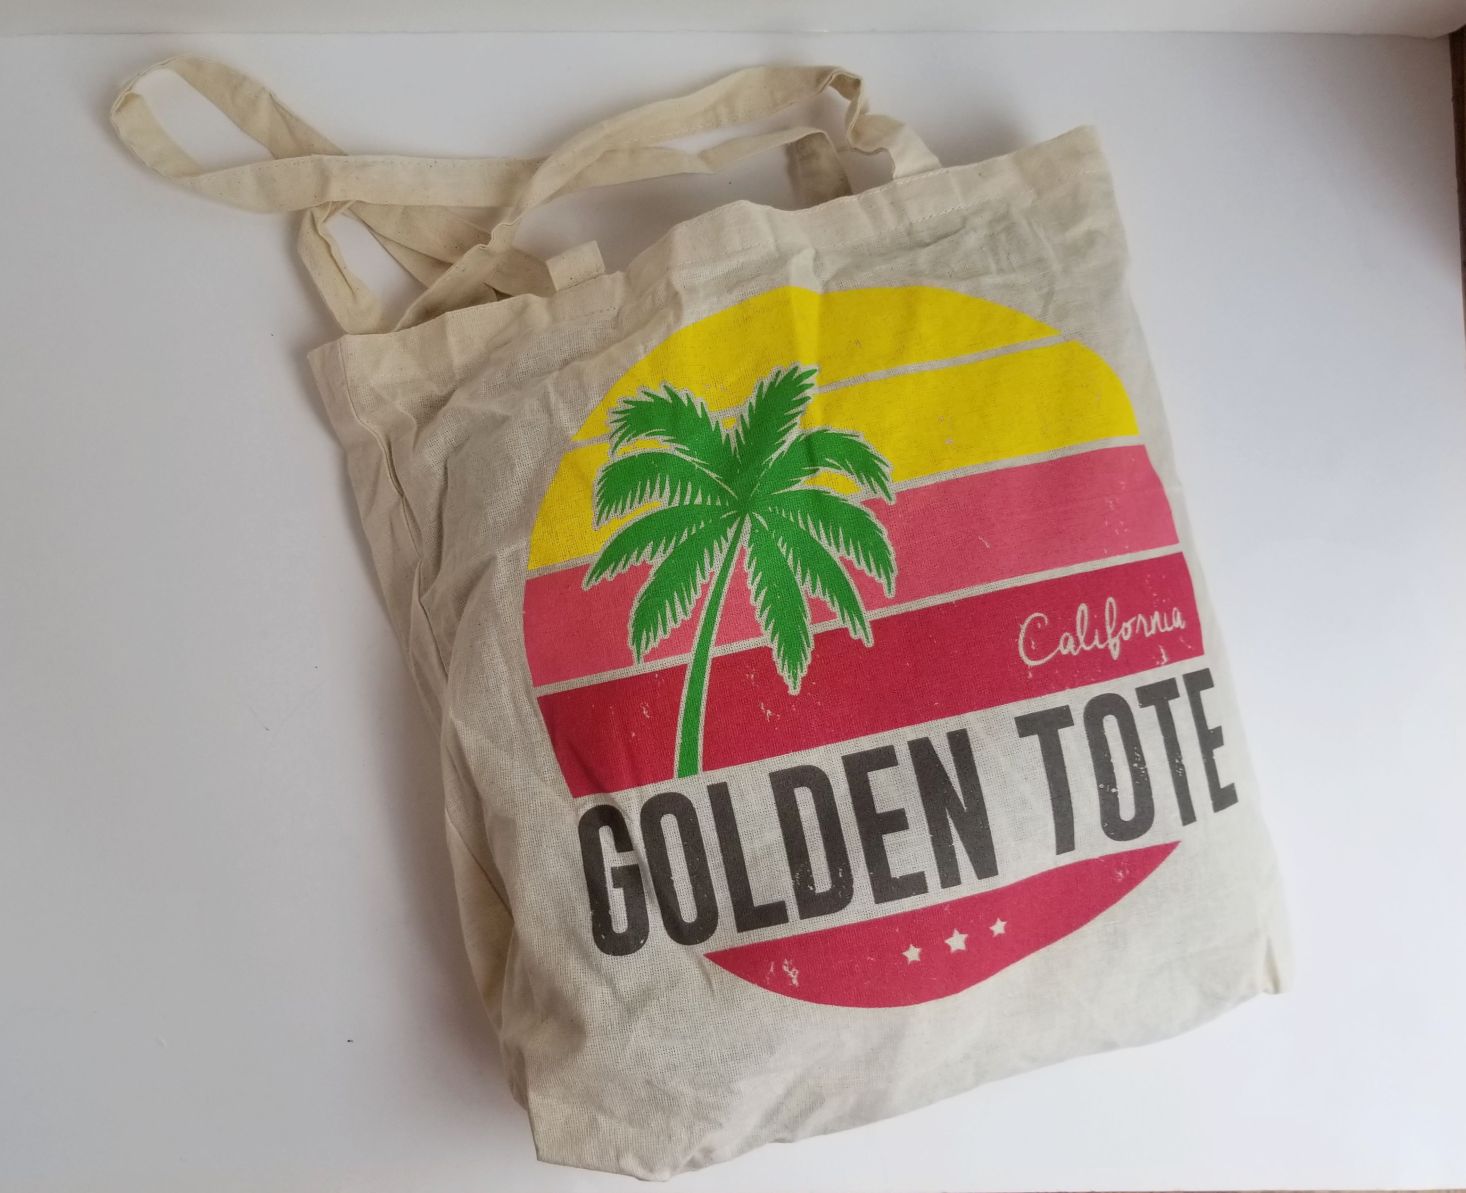 Golden Tote $149 Clothing Tote Review – August 2018